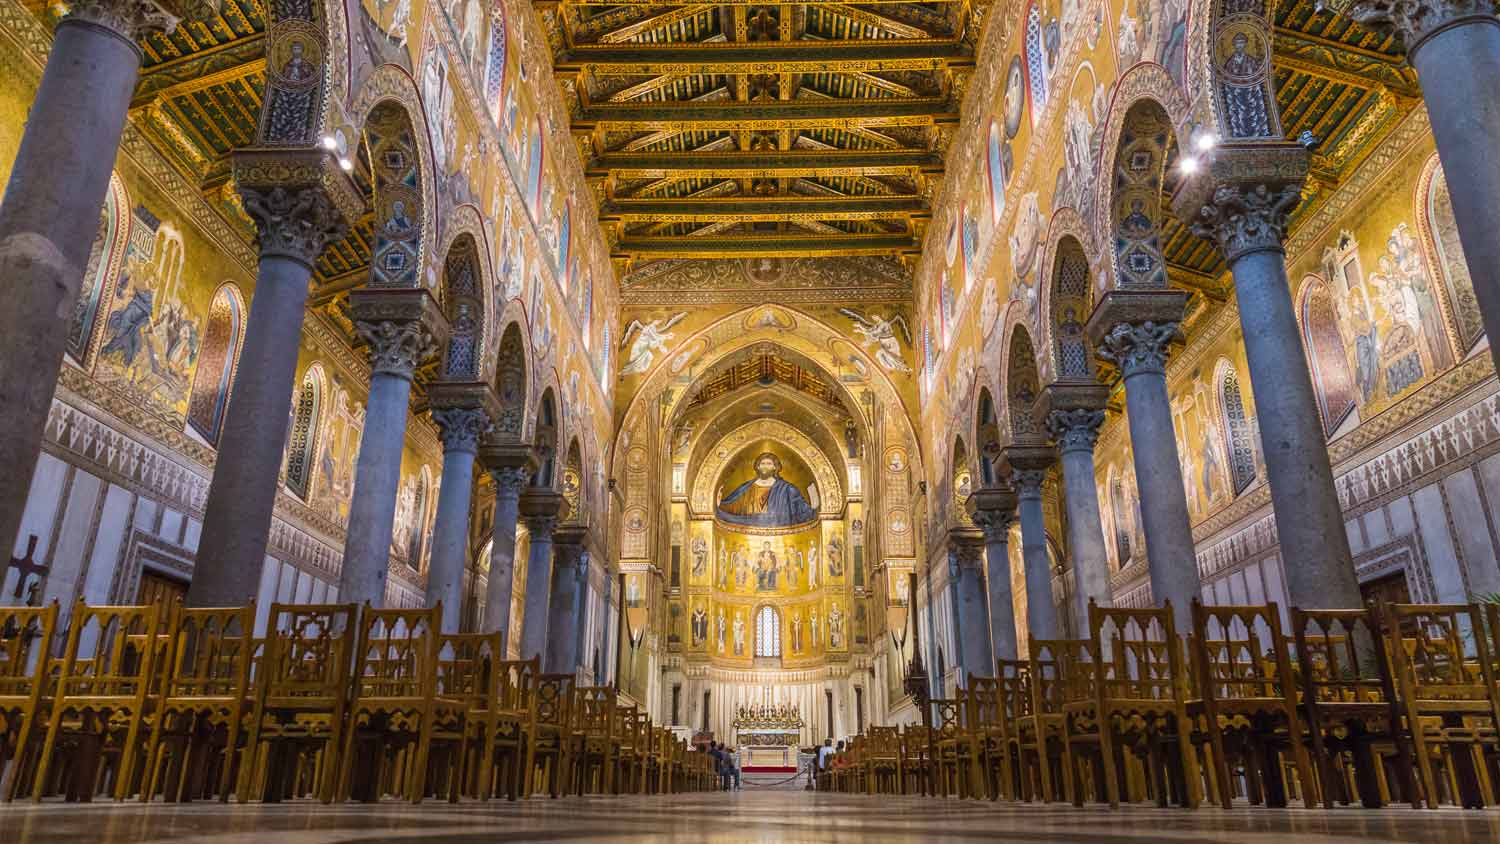 Jean Paul Barreaud | Sicily unveiled | Monreale cathedral